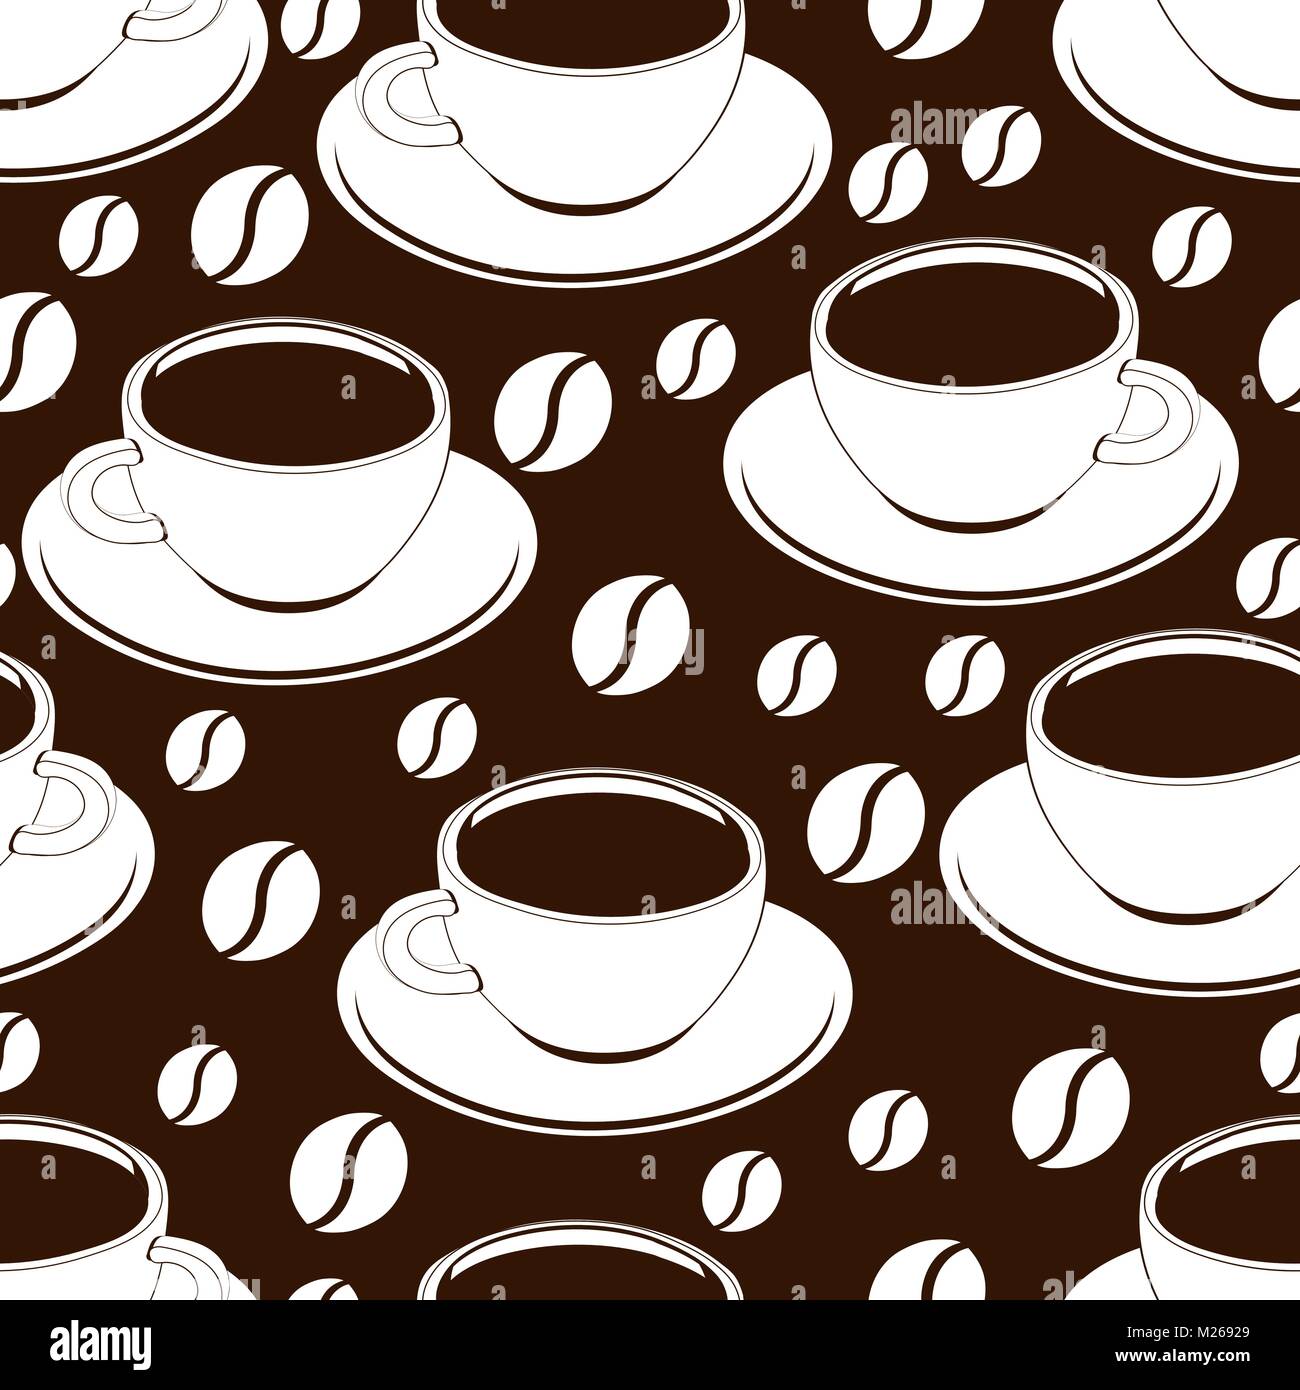 Cup of coffee outline seamless pattern, vector background, coloring, sketch, contour drawing. Drawn cups of black coffee and coffee beans on a brown backdrop. For wallpaper design, fabrics, decorating Stock Vector